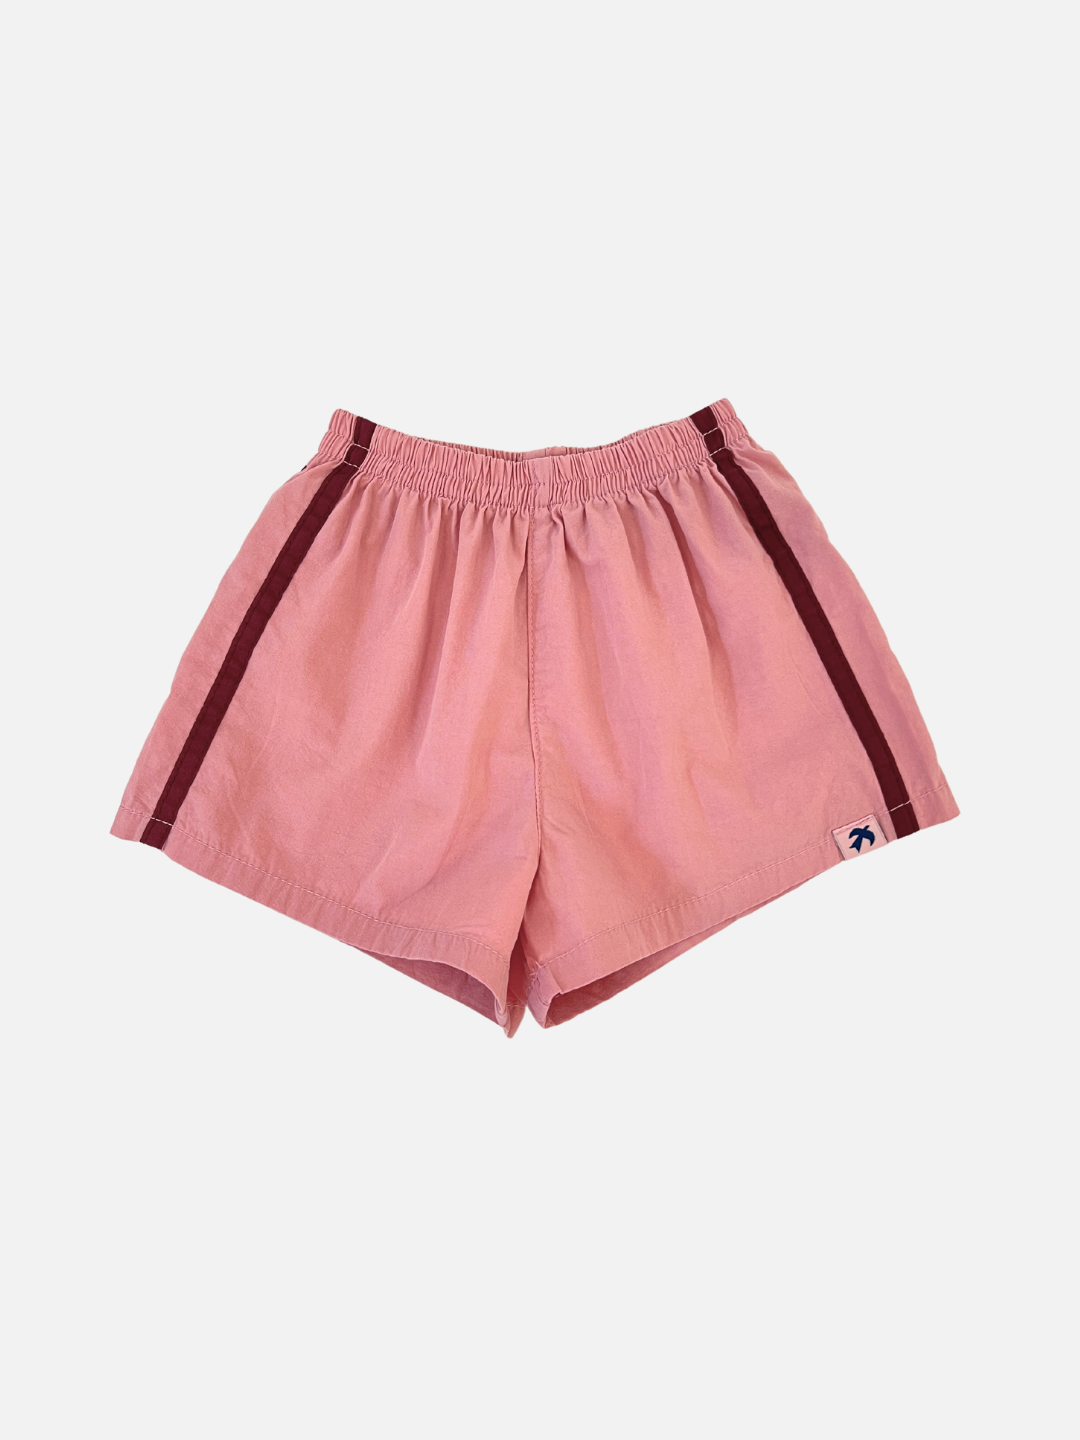 Dusty Pink | Front view of the kids' dusty pink shorts with burgundy stripes on the sides. 